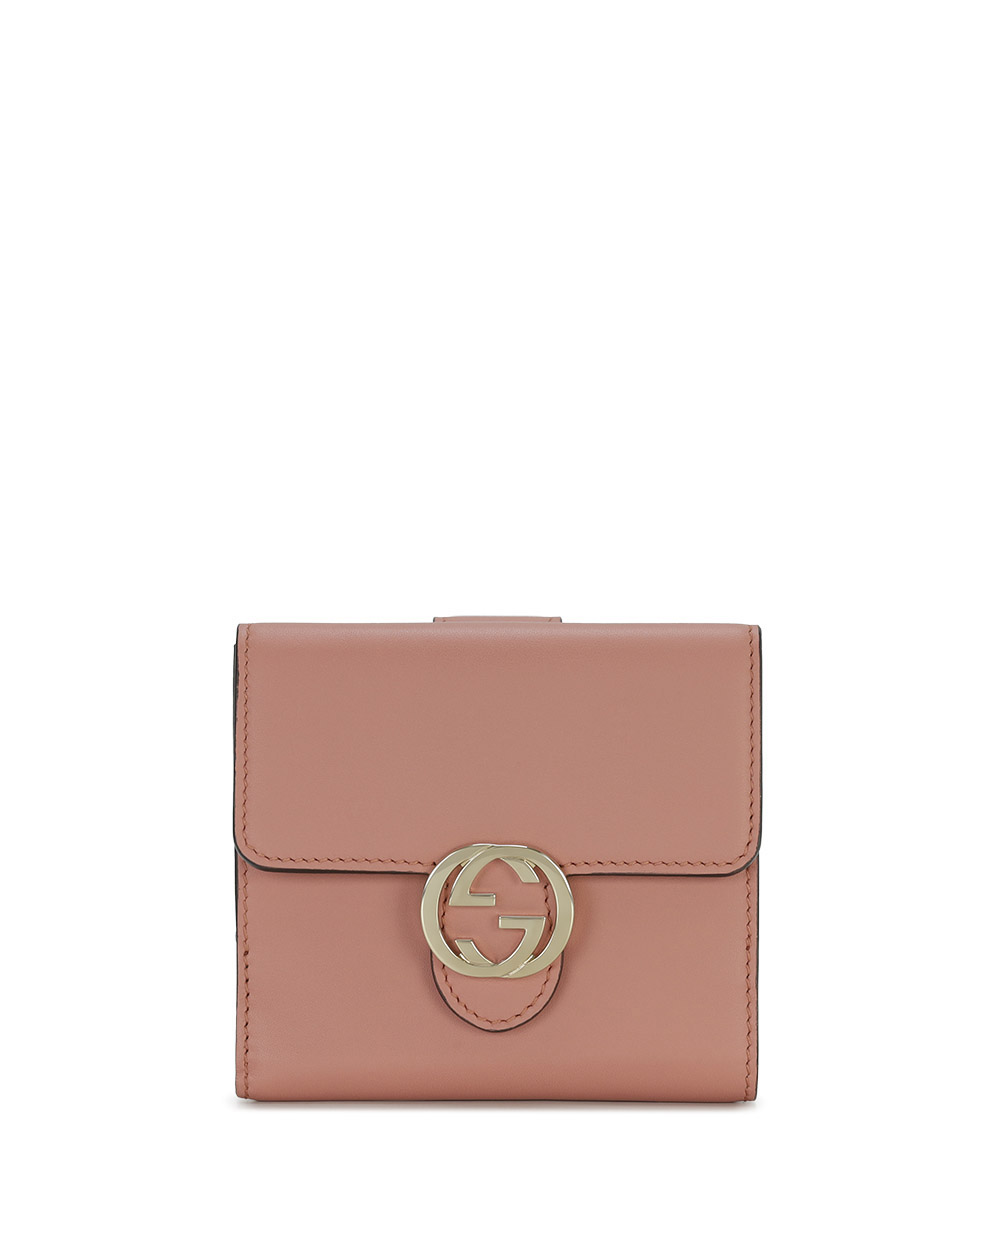 Image 1 of GUCCI WALLET ウォレット 369676 AP00G 6335